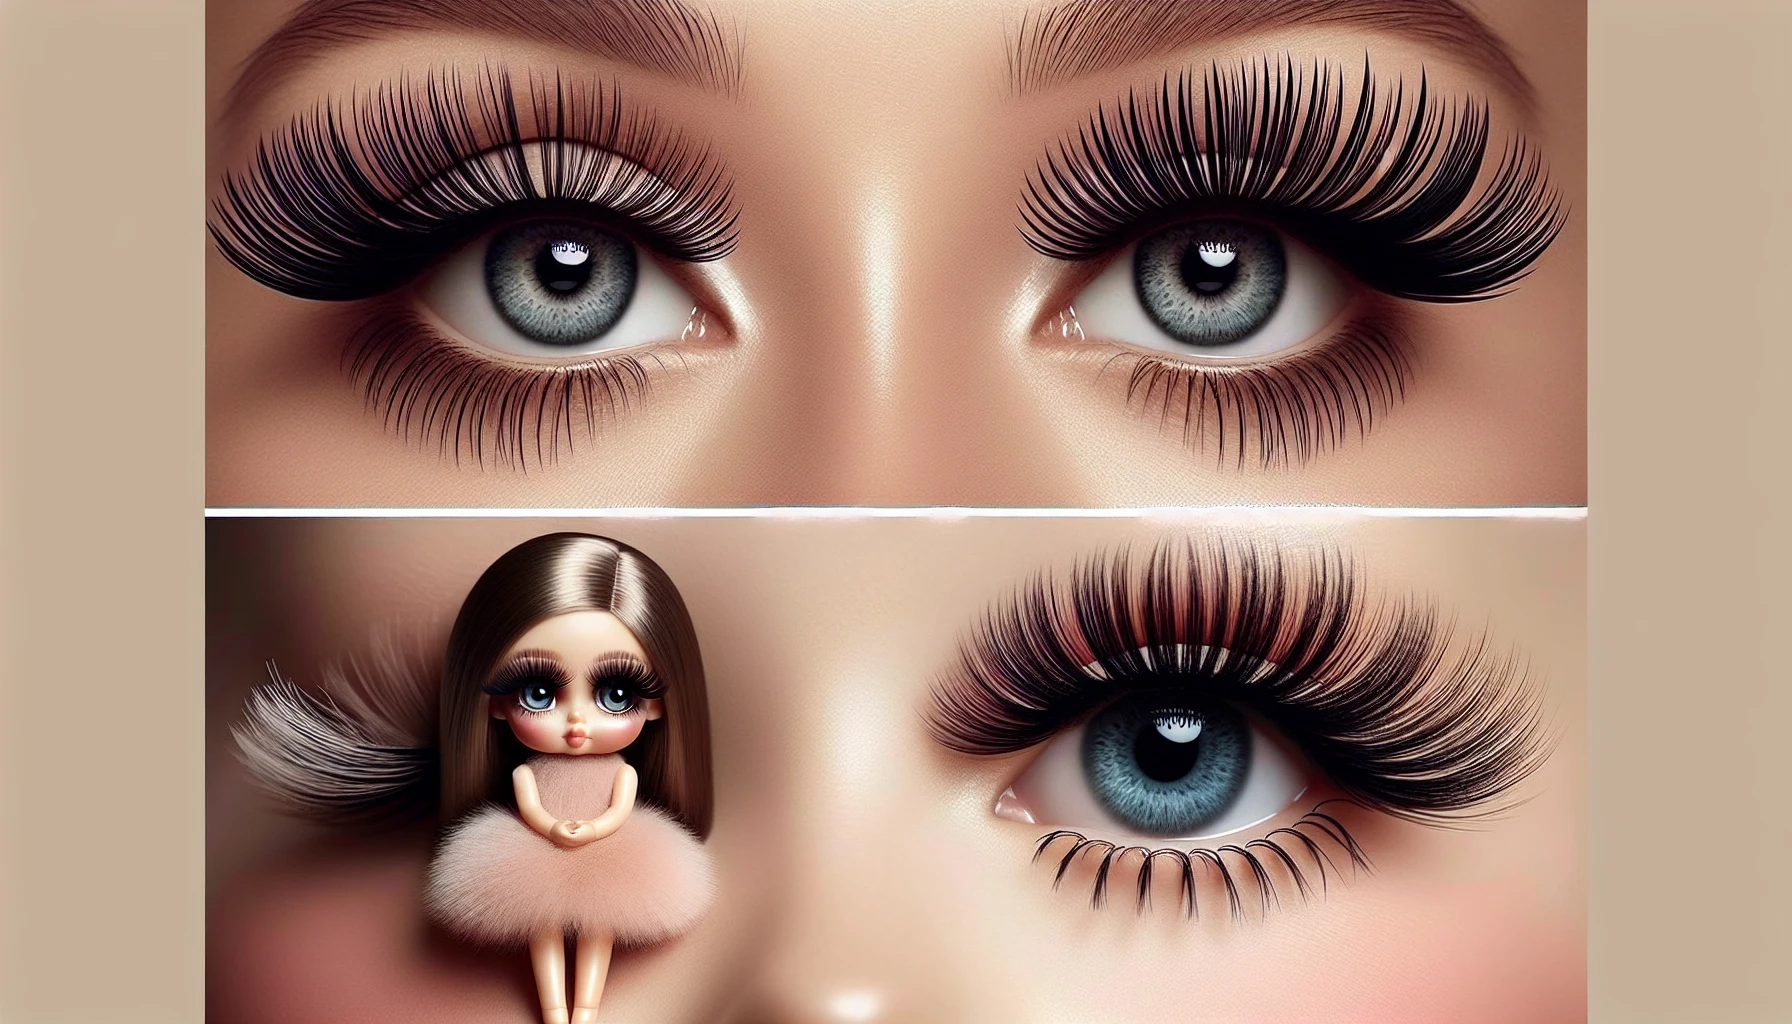 Two sets of eyelashes with different styles